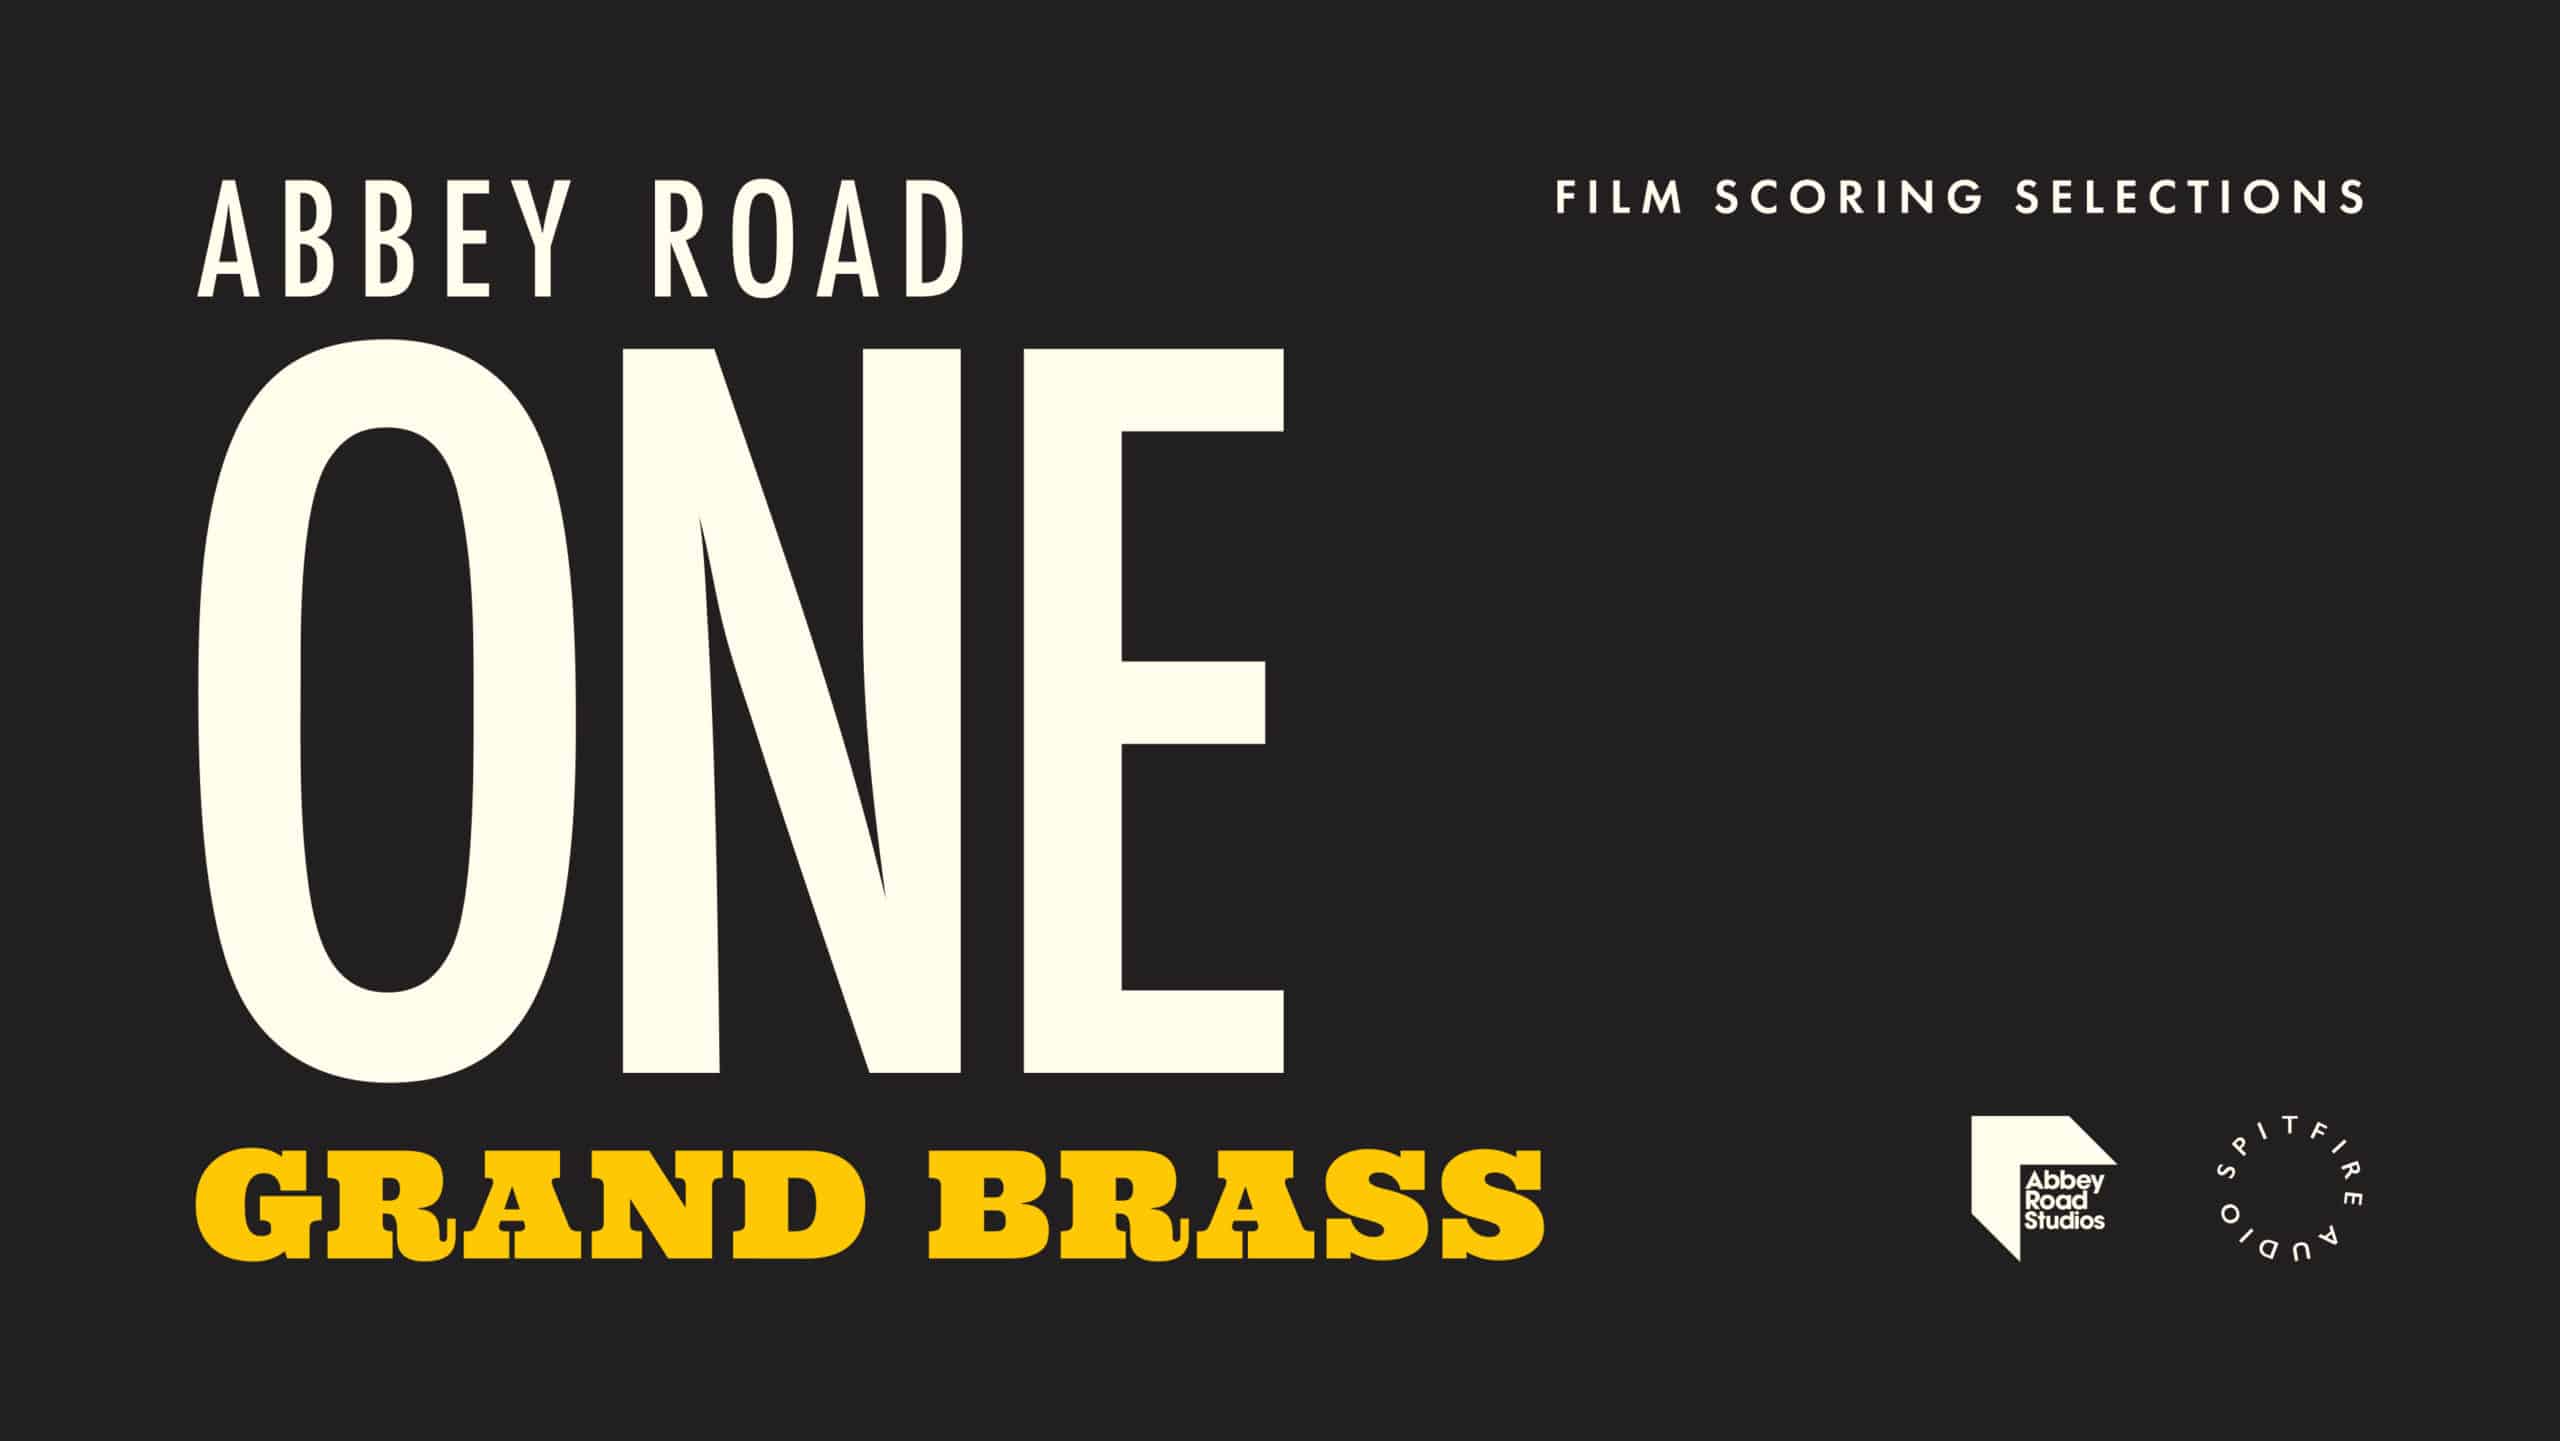 ABBEY ROAD ONE: GRAND BRASS The Next Instalment of Spitfire Audio Teaming With Abbey Road Studios